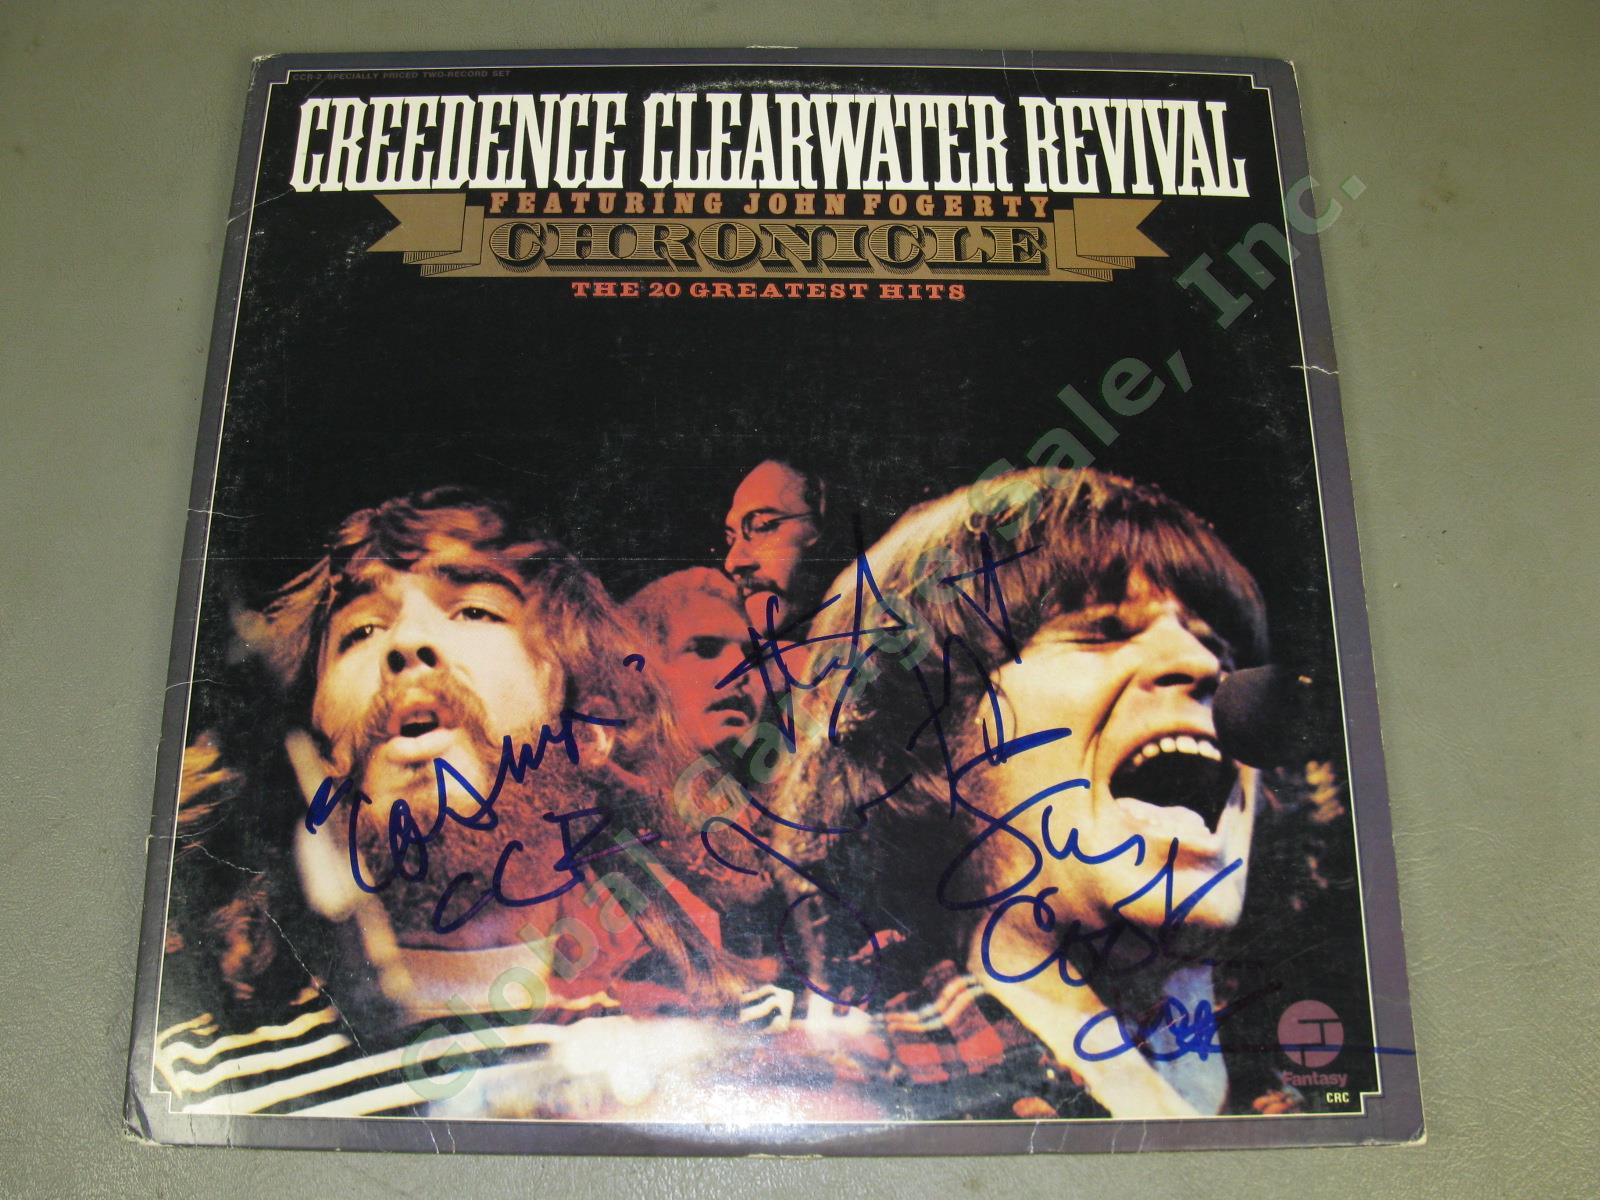 Signed CCR Creedence Clearwater Revival Greatest Hits LP Album John Fogerty COA 1